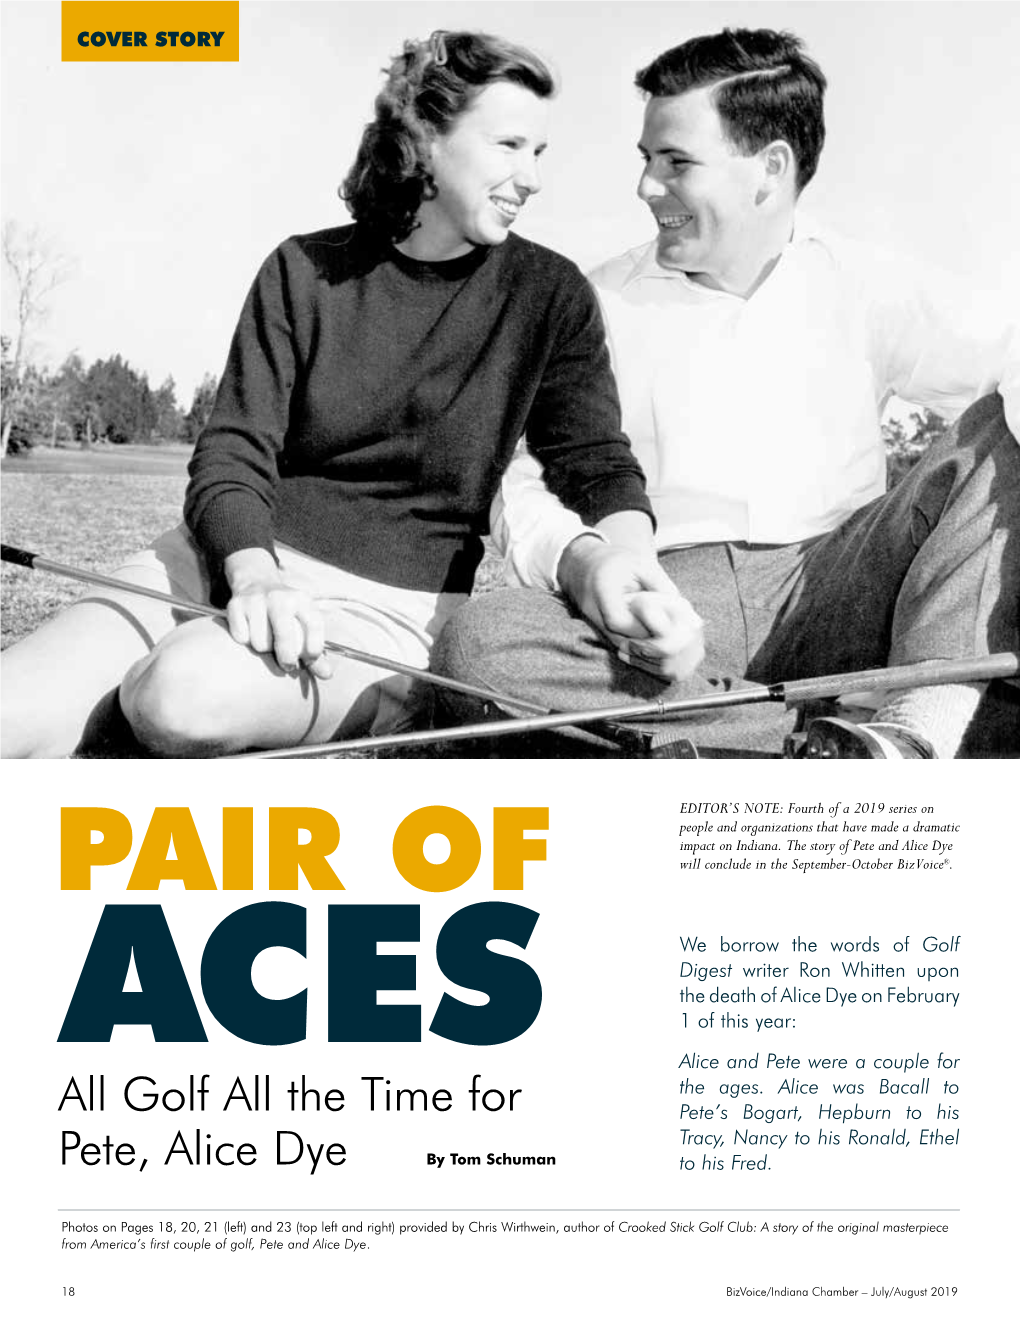 Golf All the Time for Pete, Alice